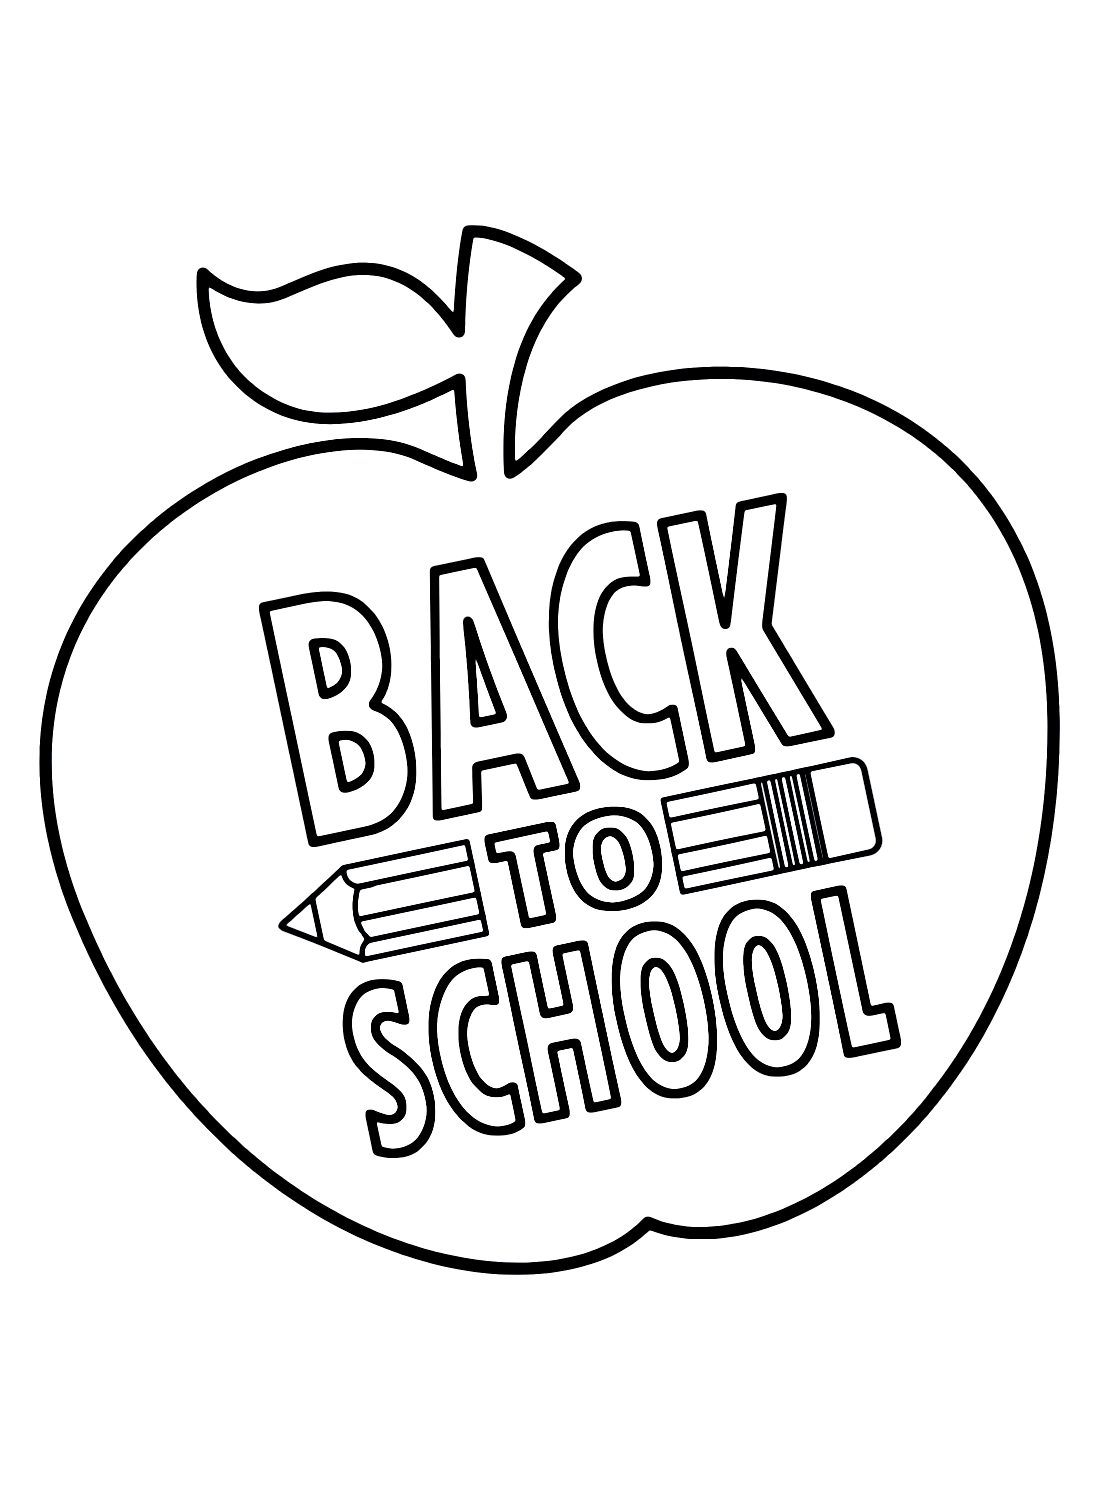 Back to School Coloring for Kids from Back to School